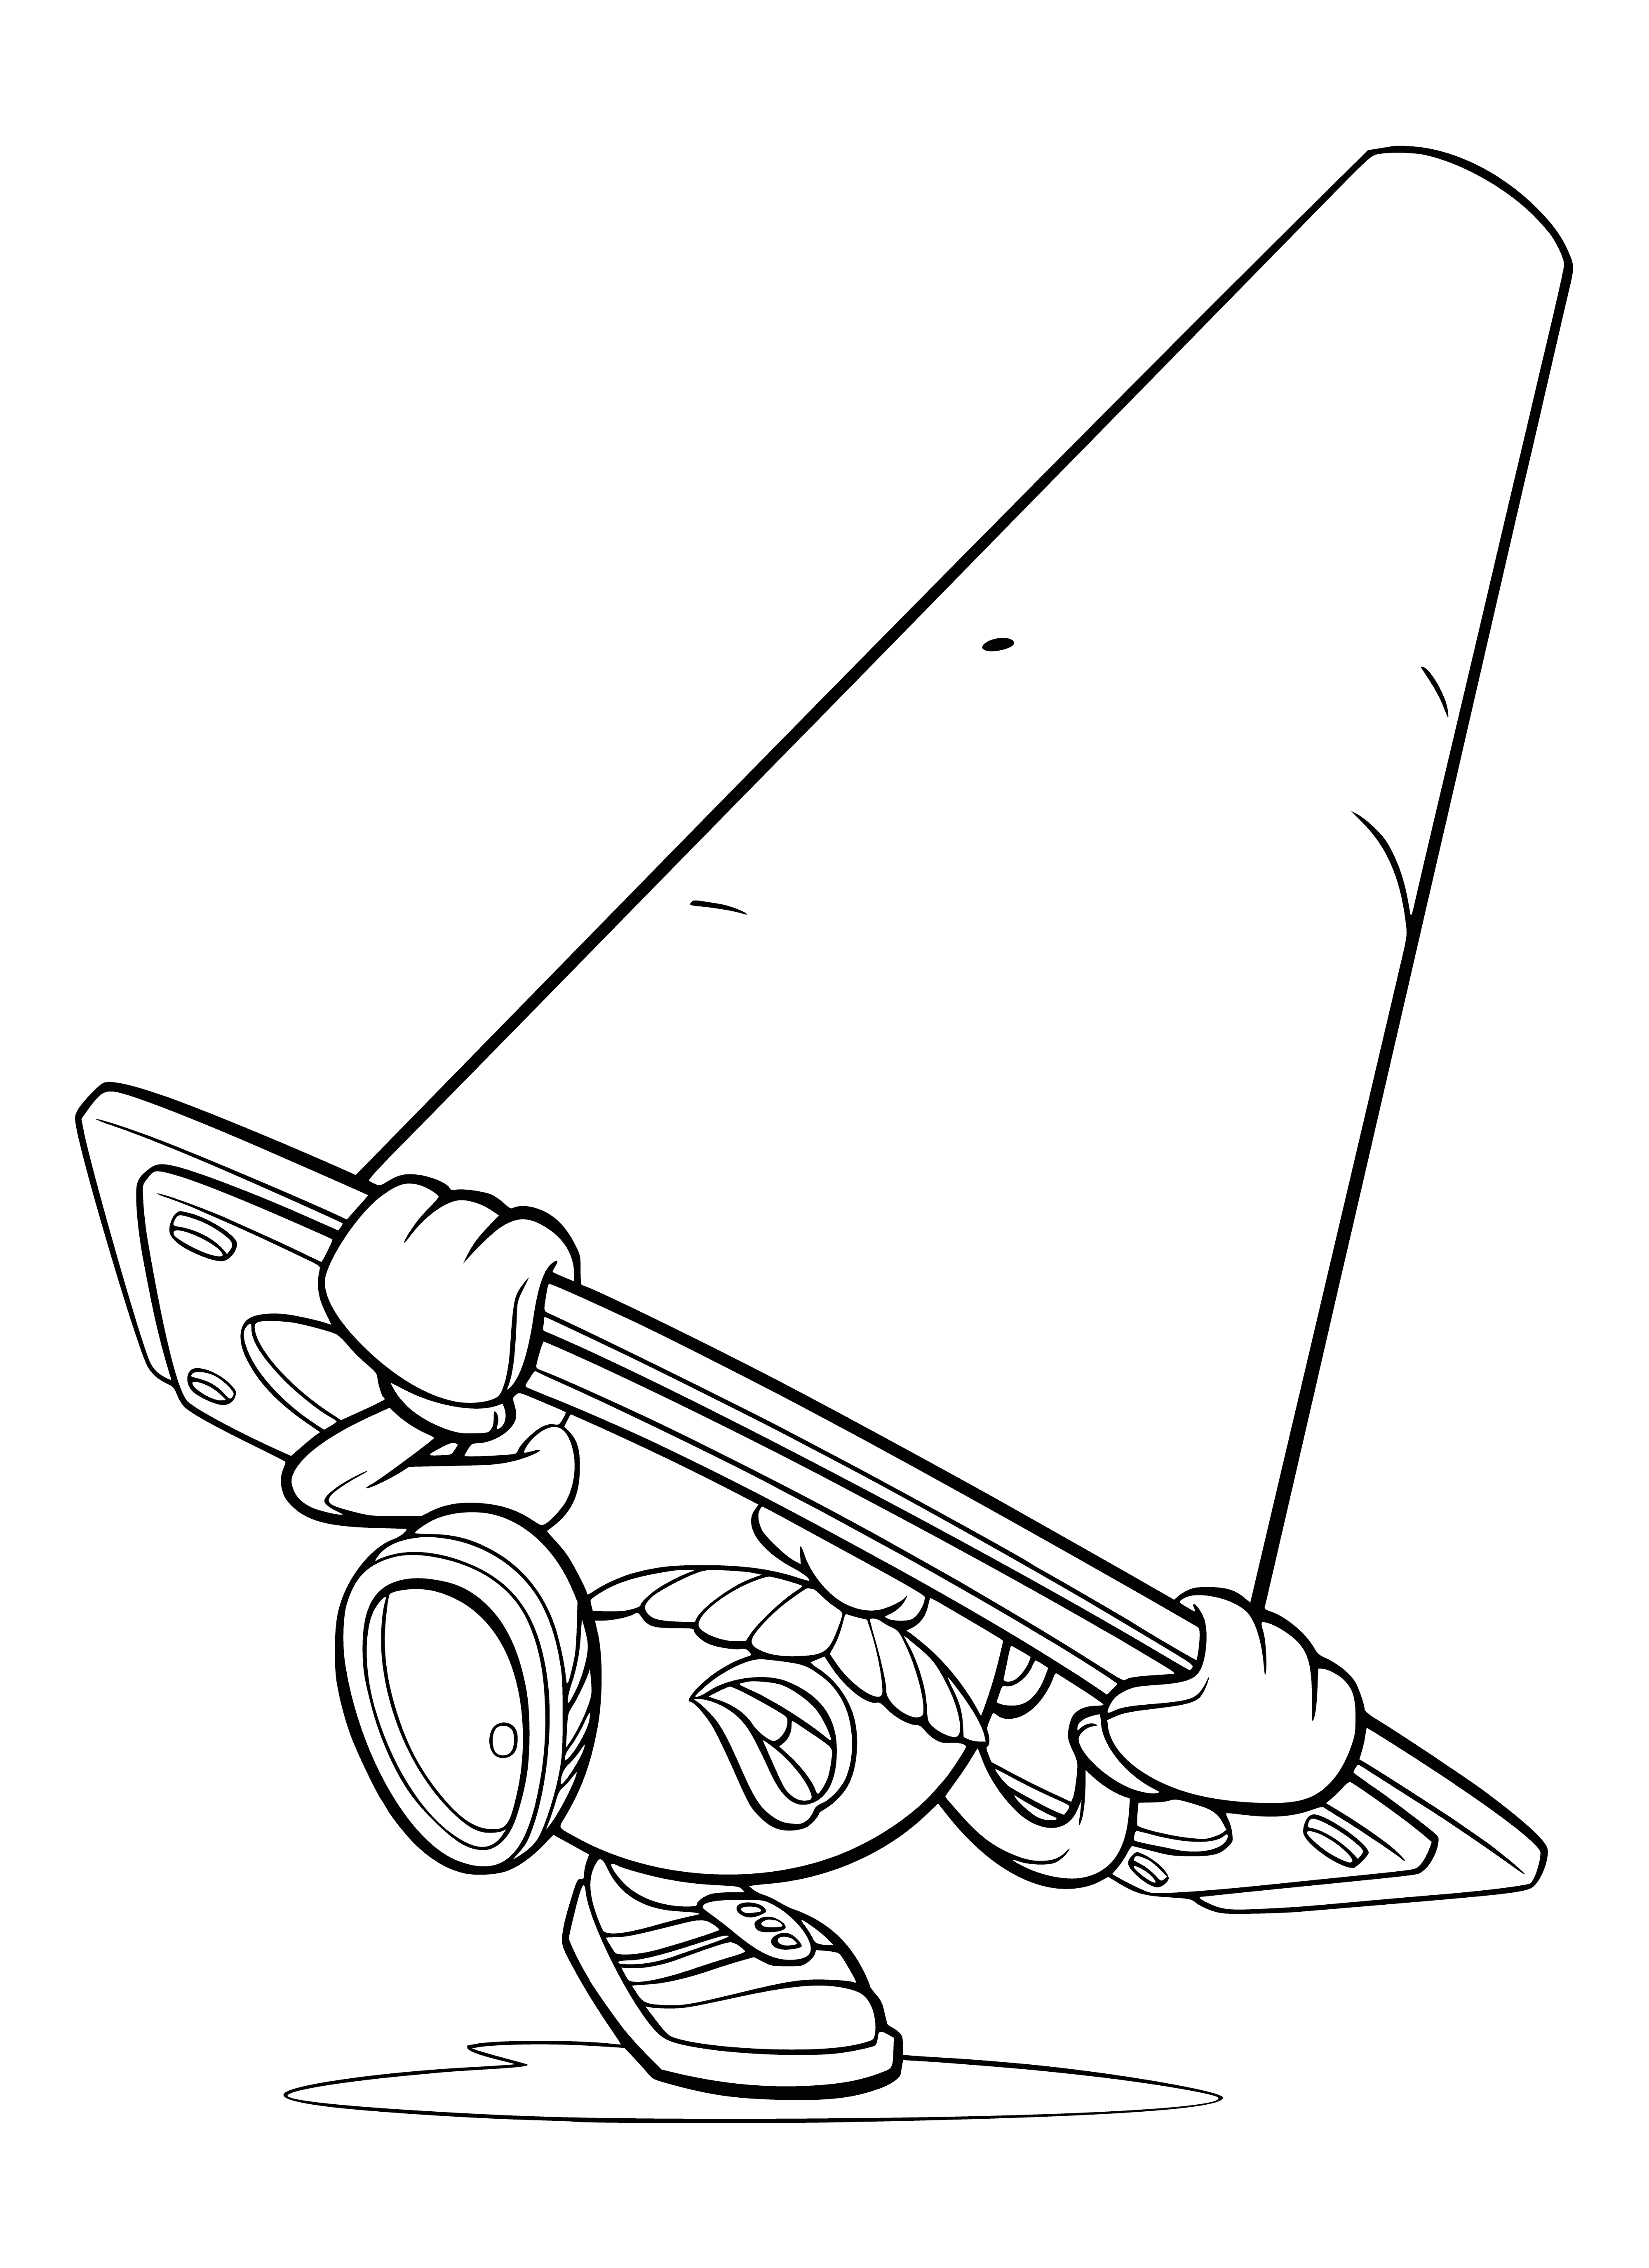 Mister potato head under the traffic cone coloring page